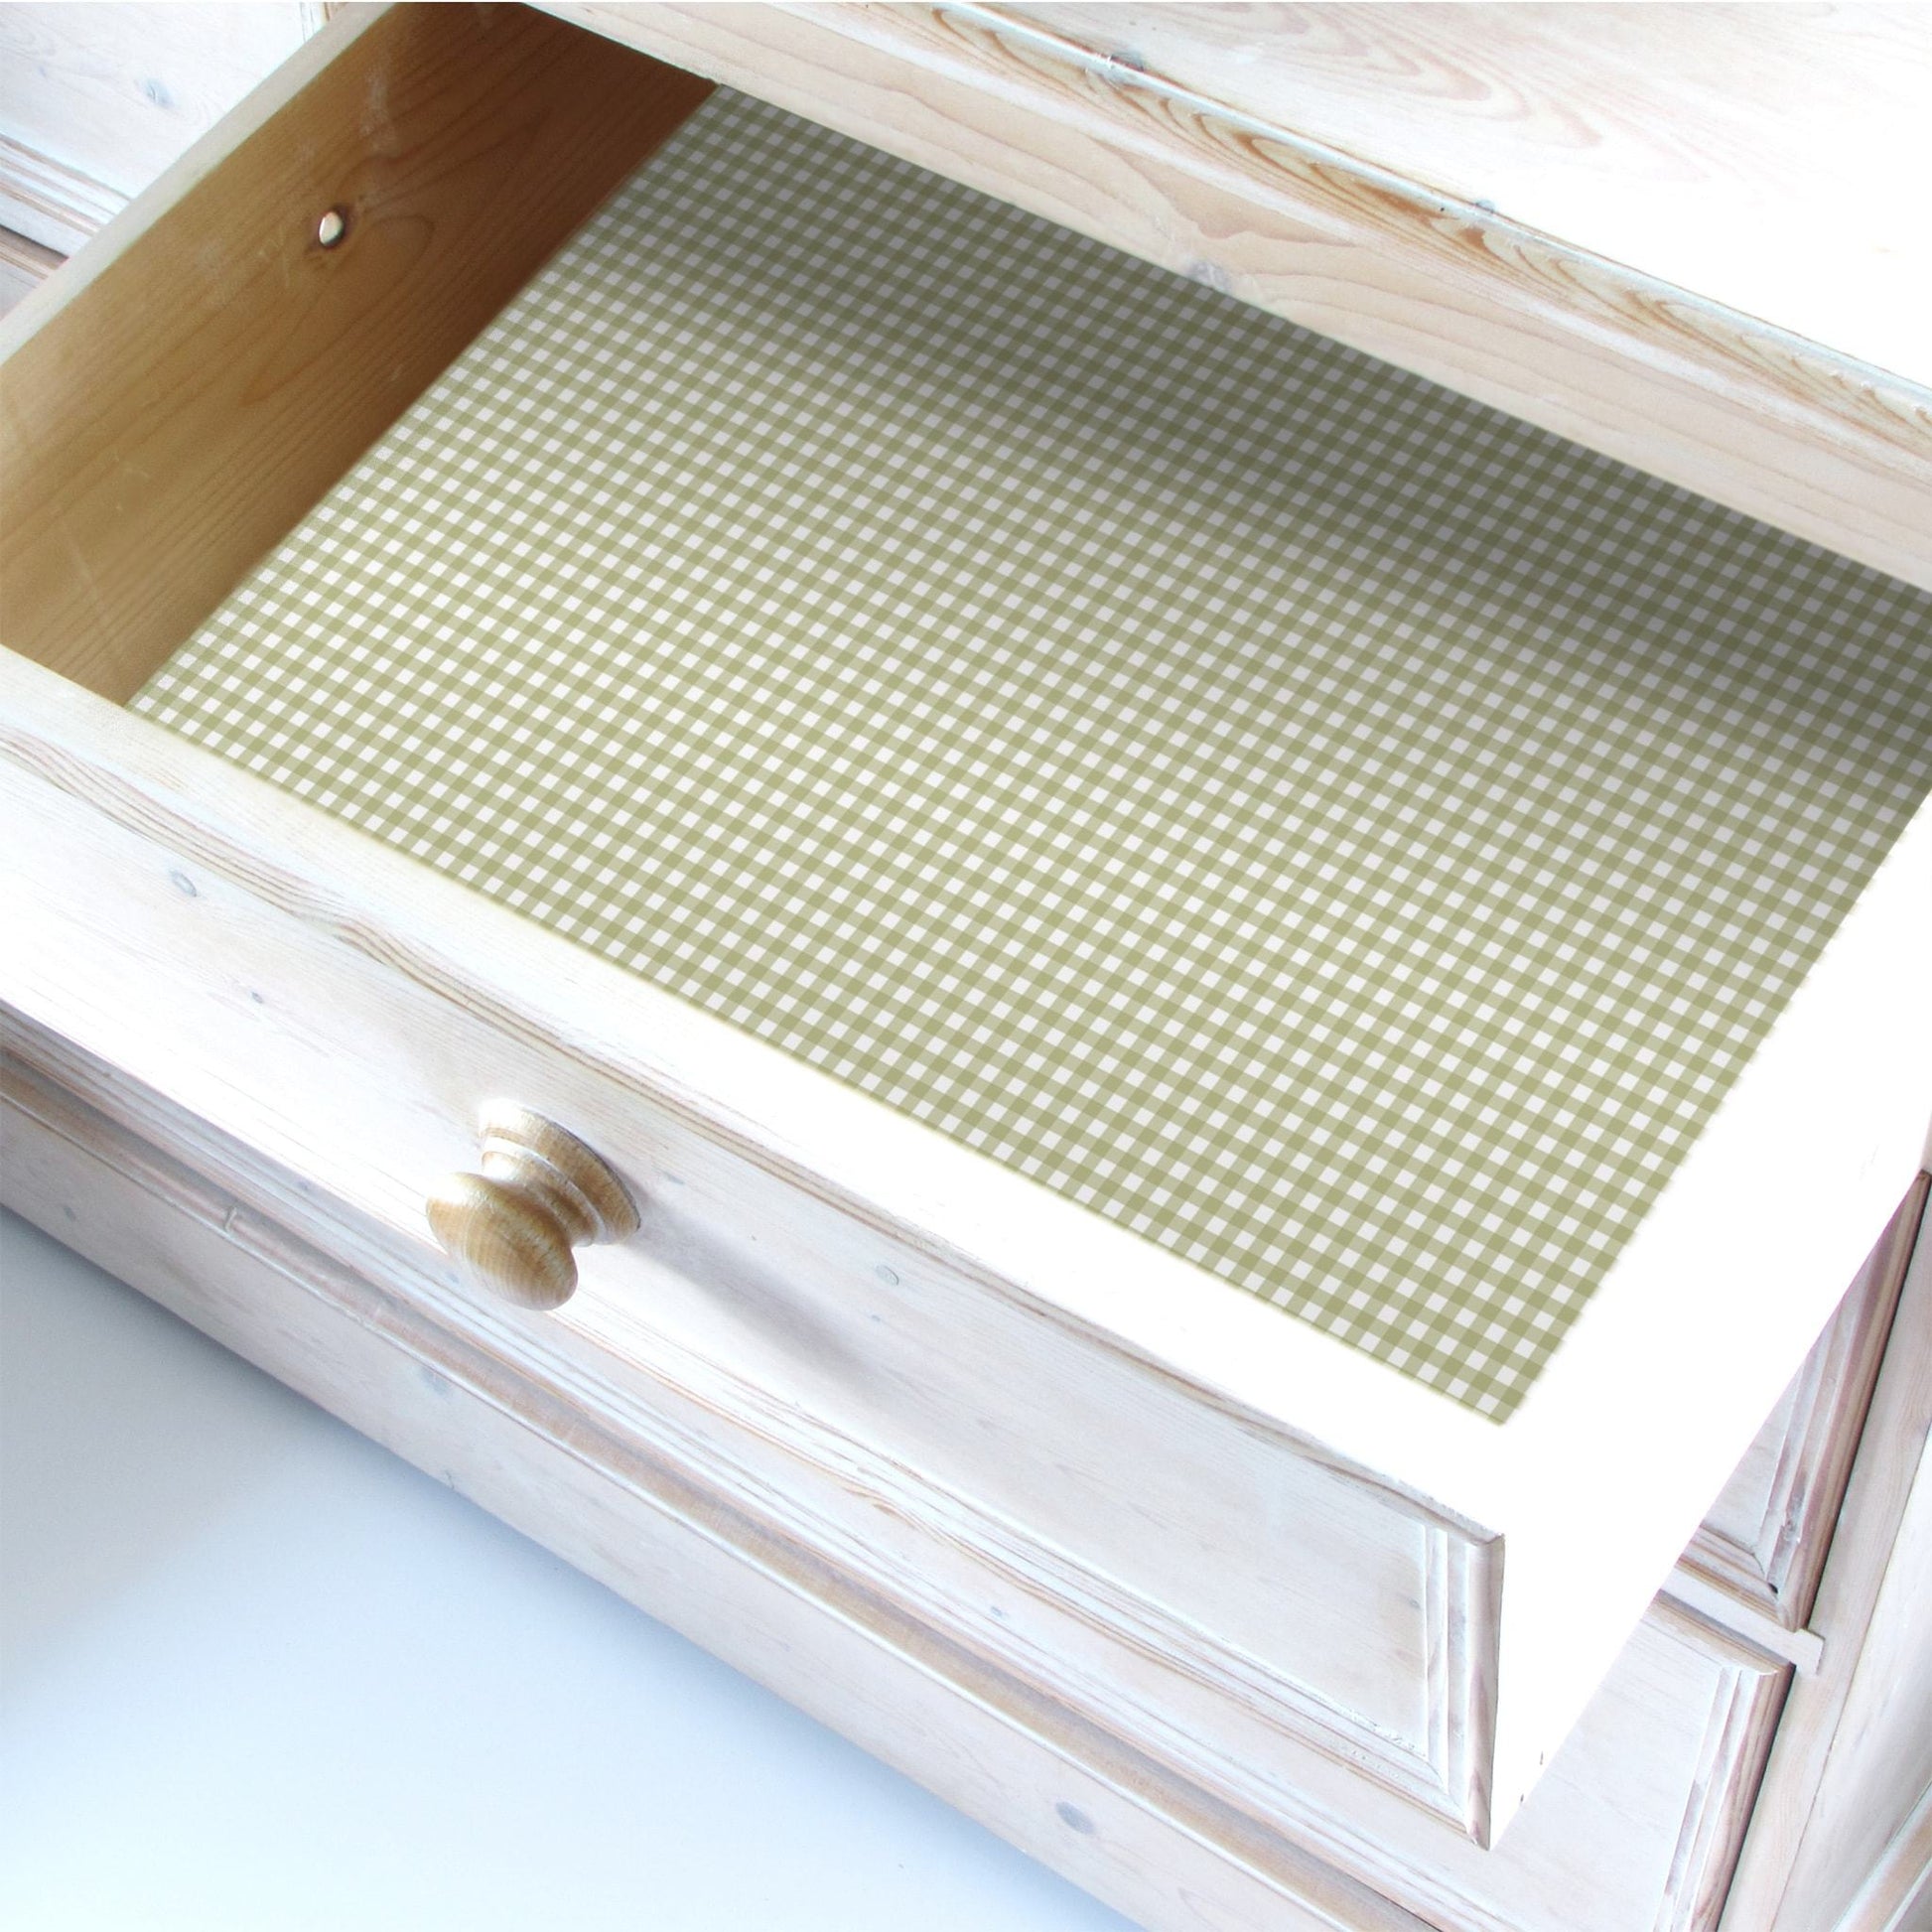 SIMPLY DRAWER LINERS | Wipe Clean & Unscented Drawer Liners in a GREEN GINGHAM Design. Perfect for Kitchen Drawers, Shelves, Cupboards & Cabinets. Made in Suffolk, England. (Green)